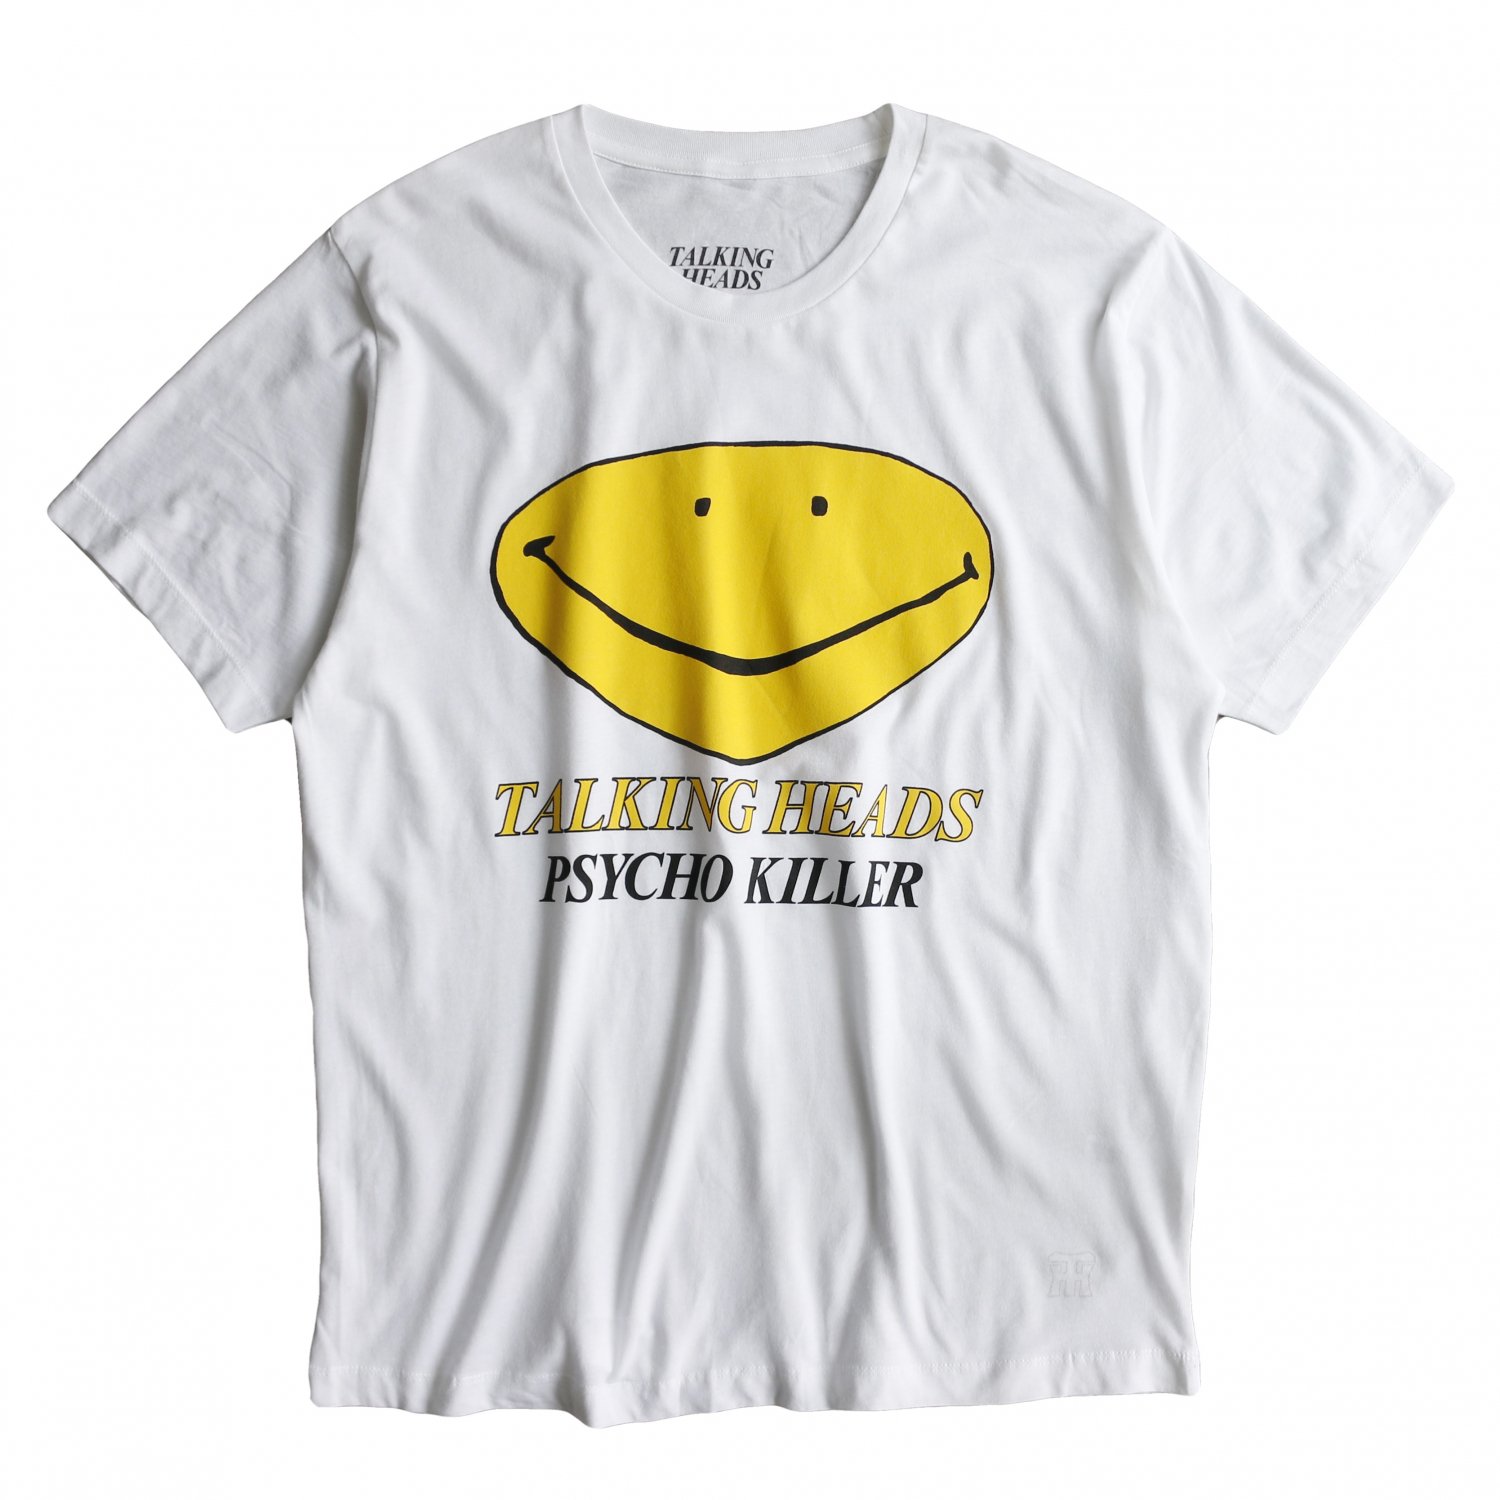 <img class='new_mark_img1' src='https://img.shop-pro.jp/img/new/icons8.gif' style='border:none;display:inline;margin:0px;padding:0px;width:auto;' />Music Tee / S/S TEE TALKING HEADS 